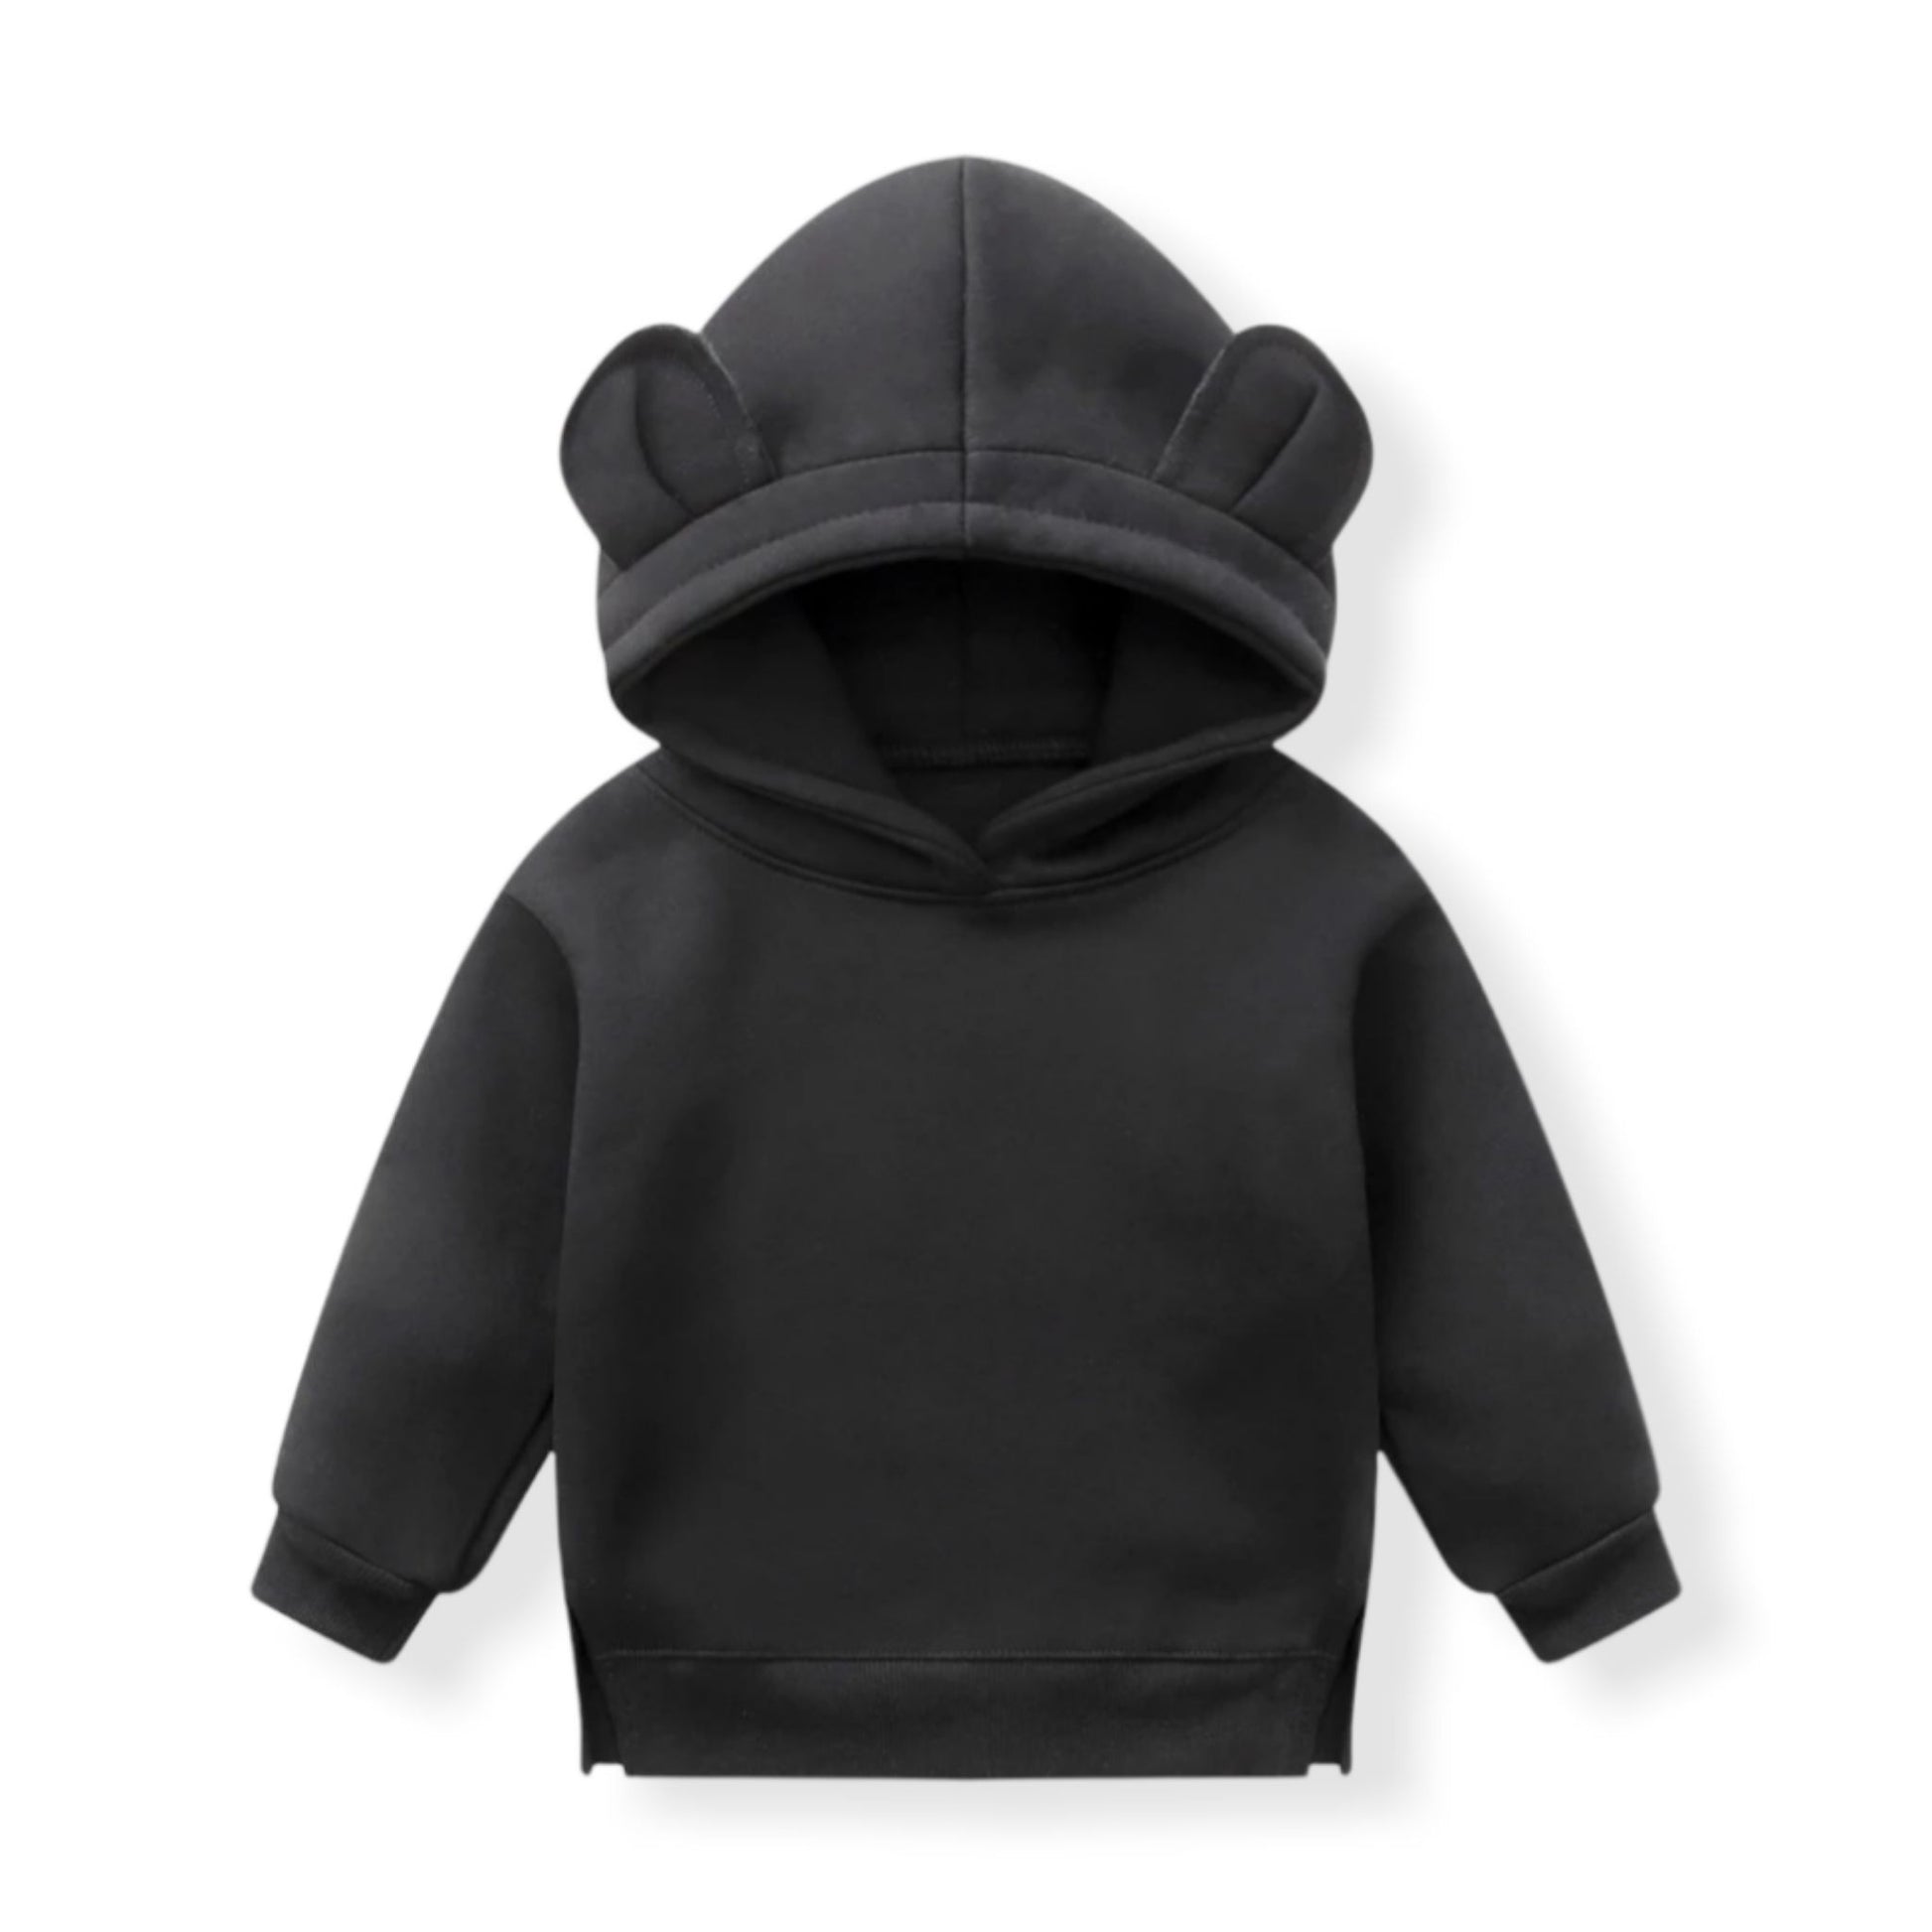 Soft Hoodie with Ears for Toddlers in Black